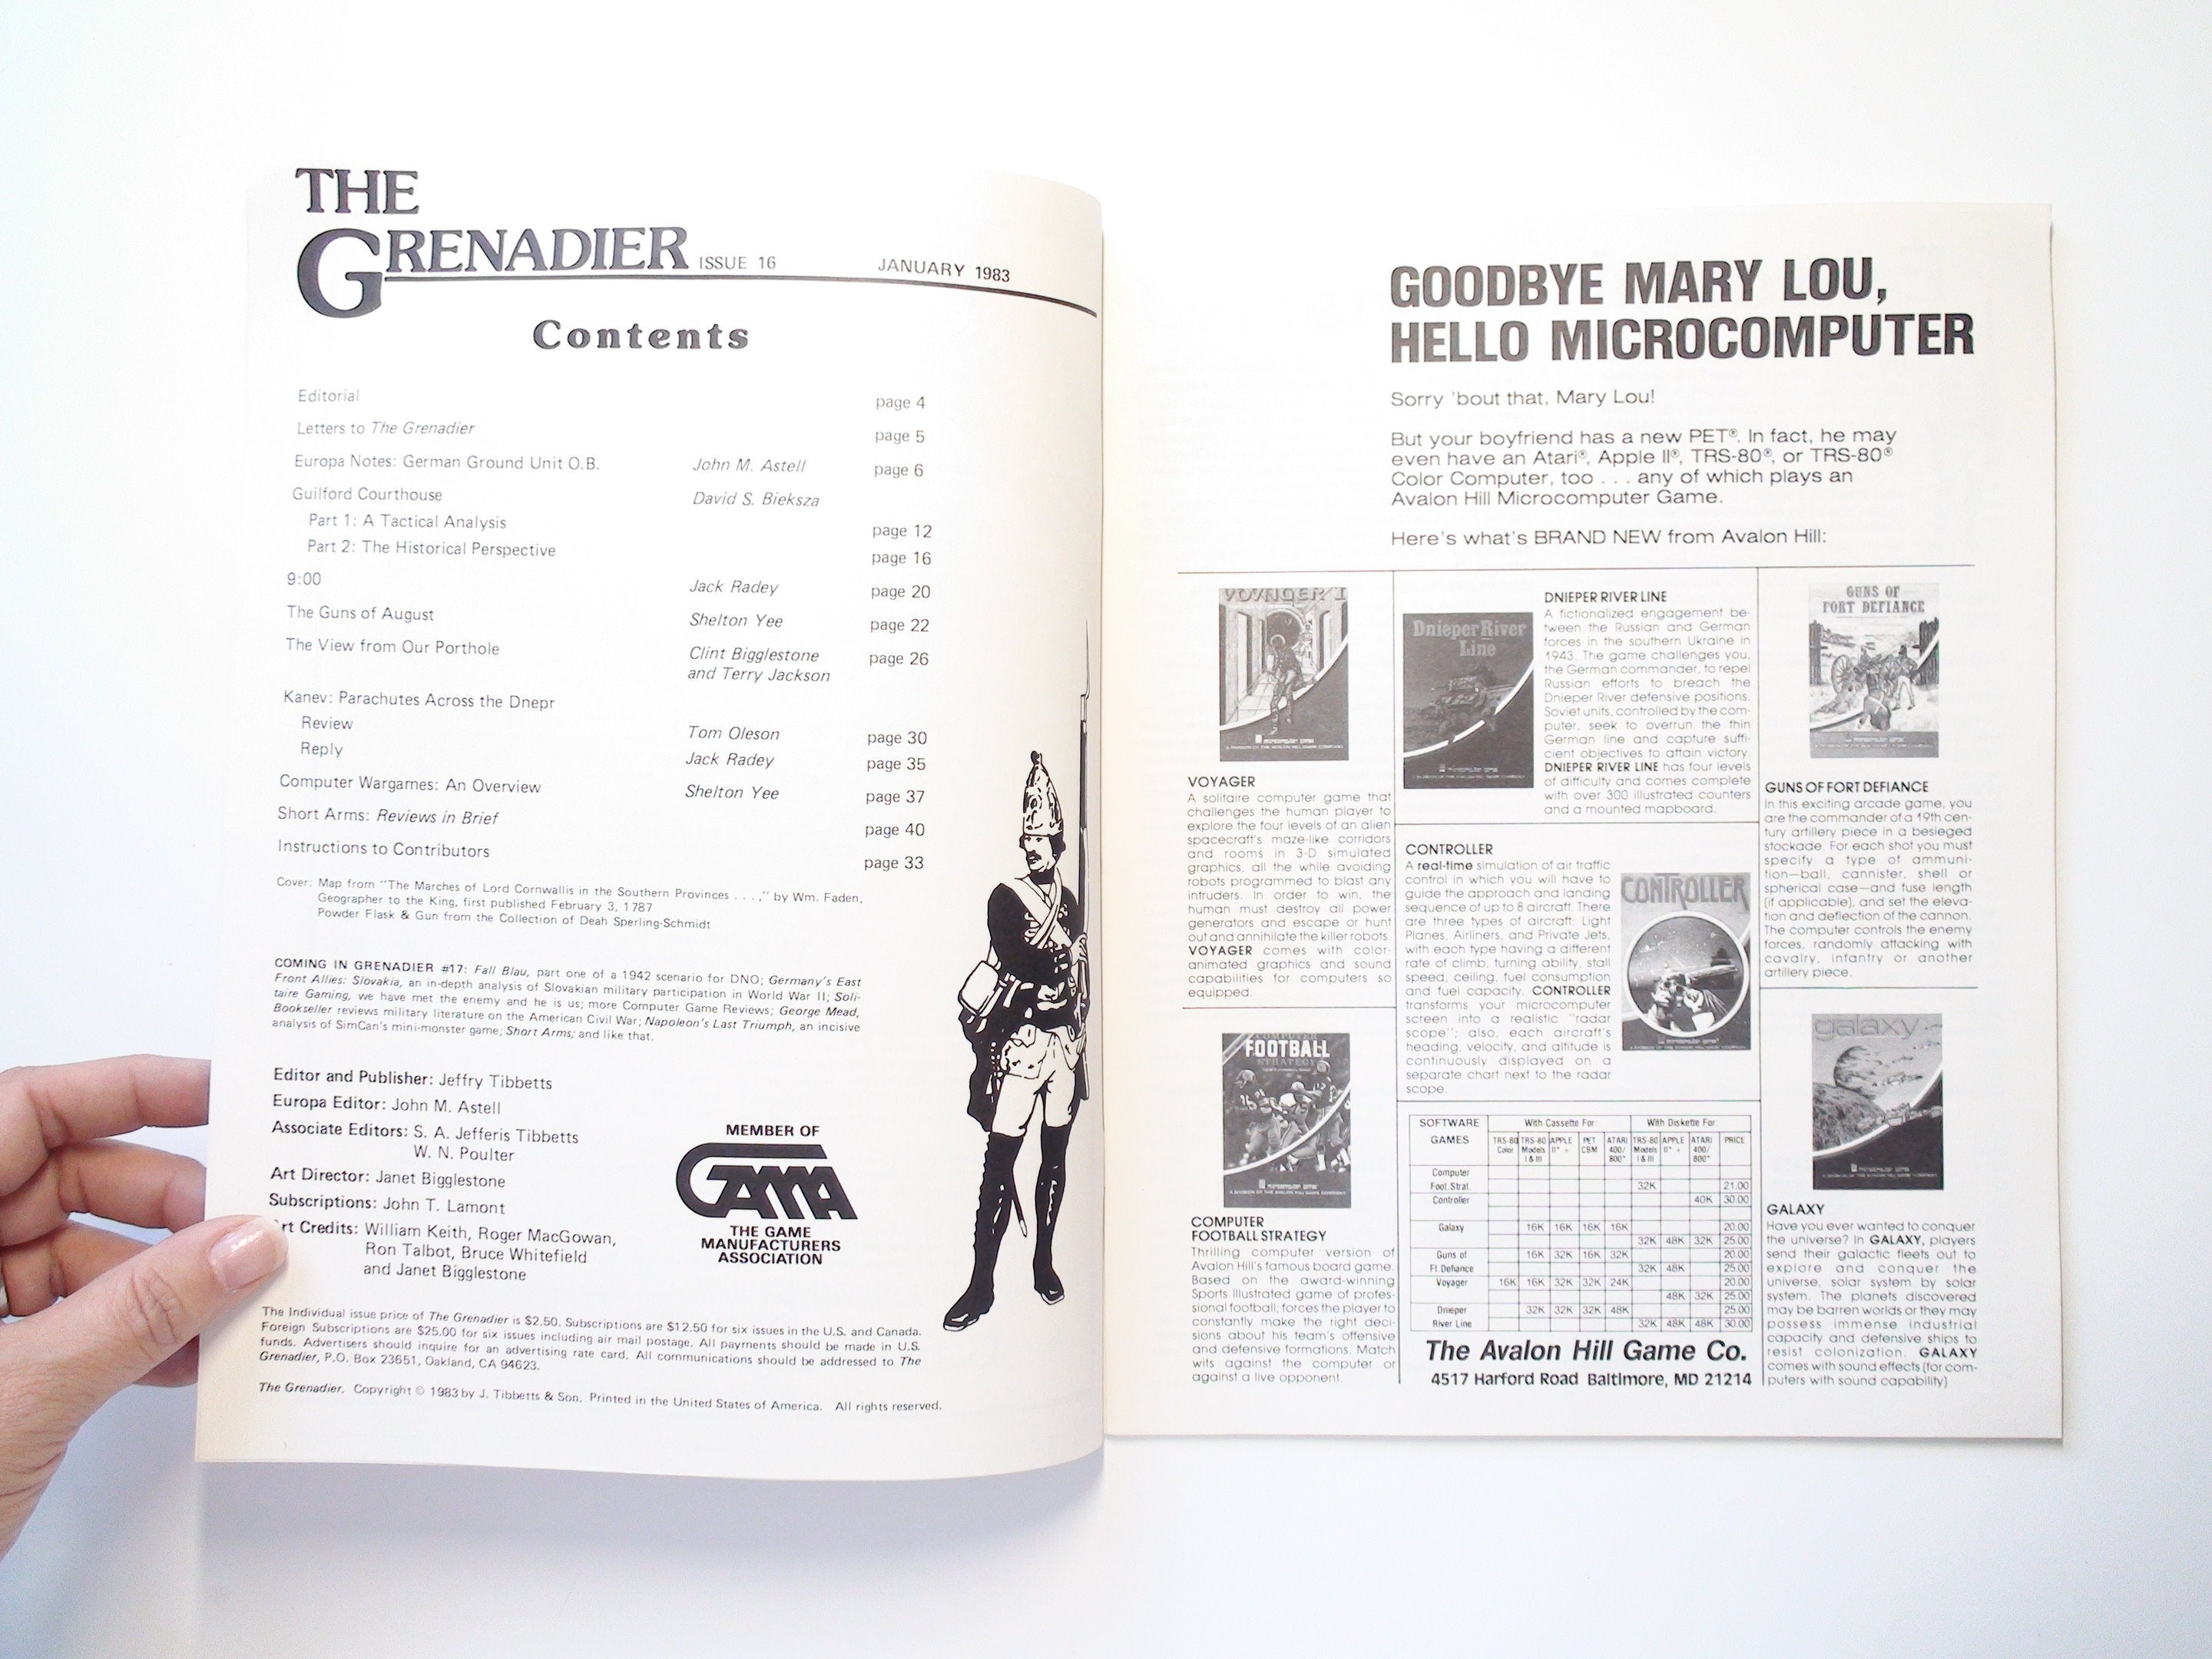 The Grenadier Magazine (GDW), #16, War Gaming, Kanev, Guilford Courthouse, 1983